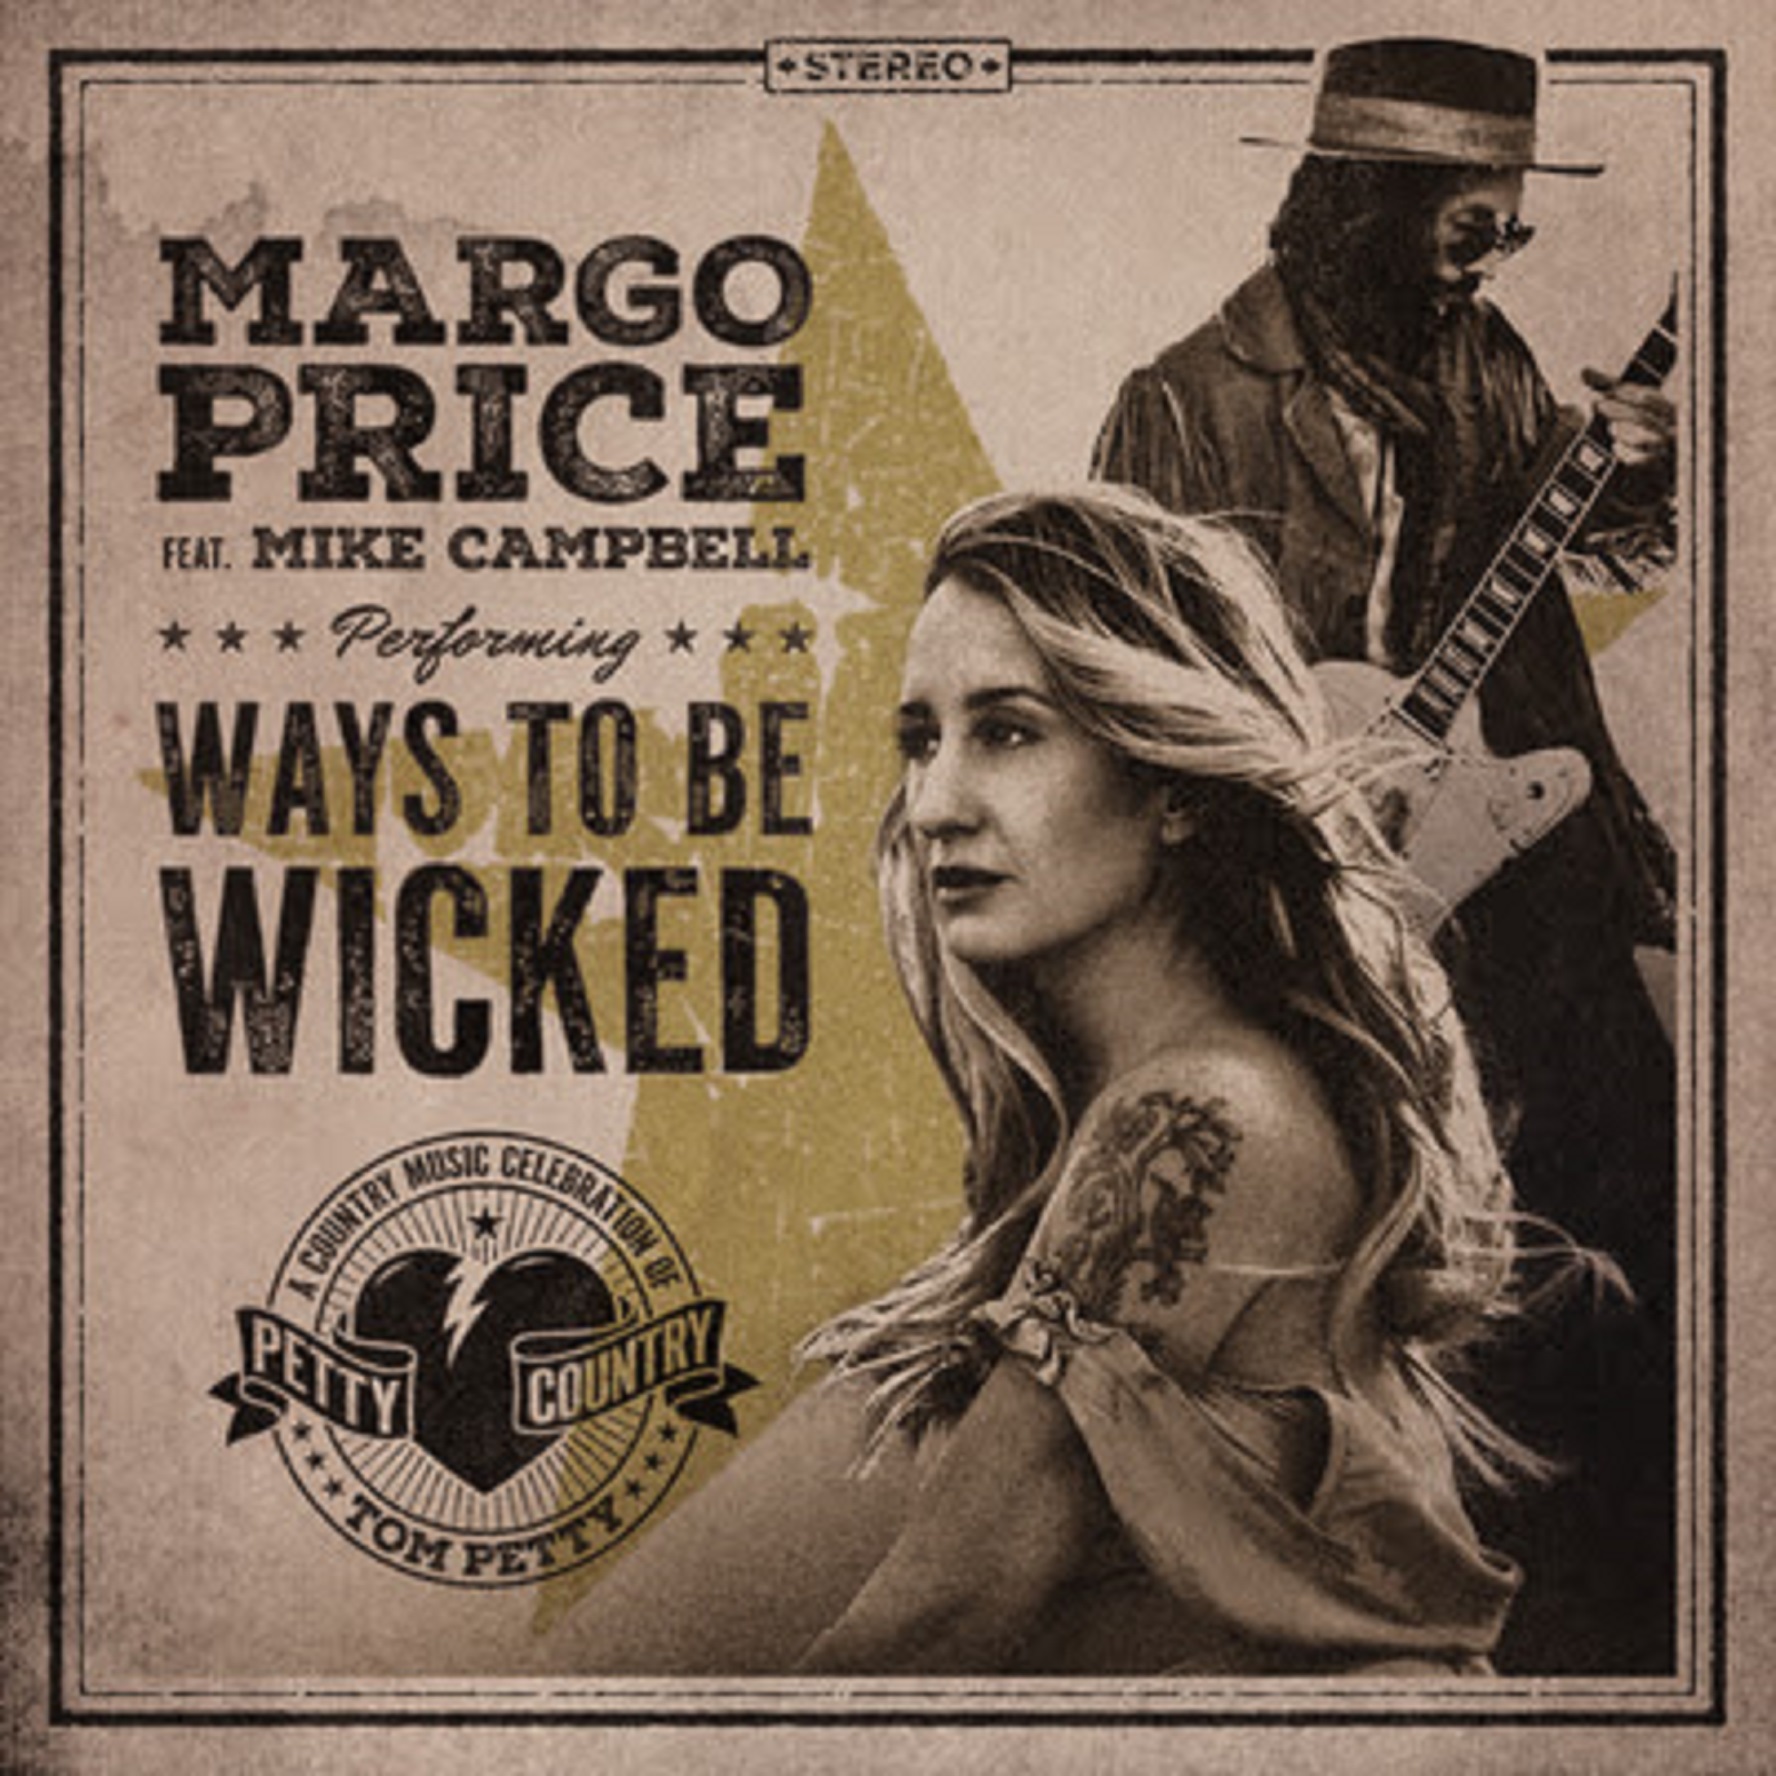 Margo Price's cover of "Ways To Be Wicked" featuring The Heartbreakers' Mike Campbell out now